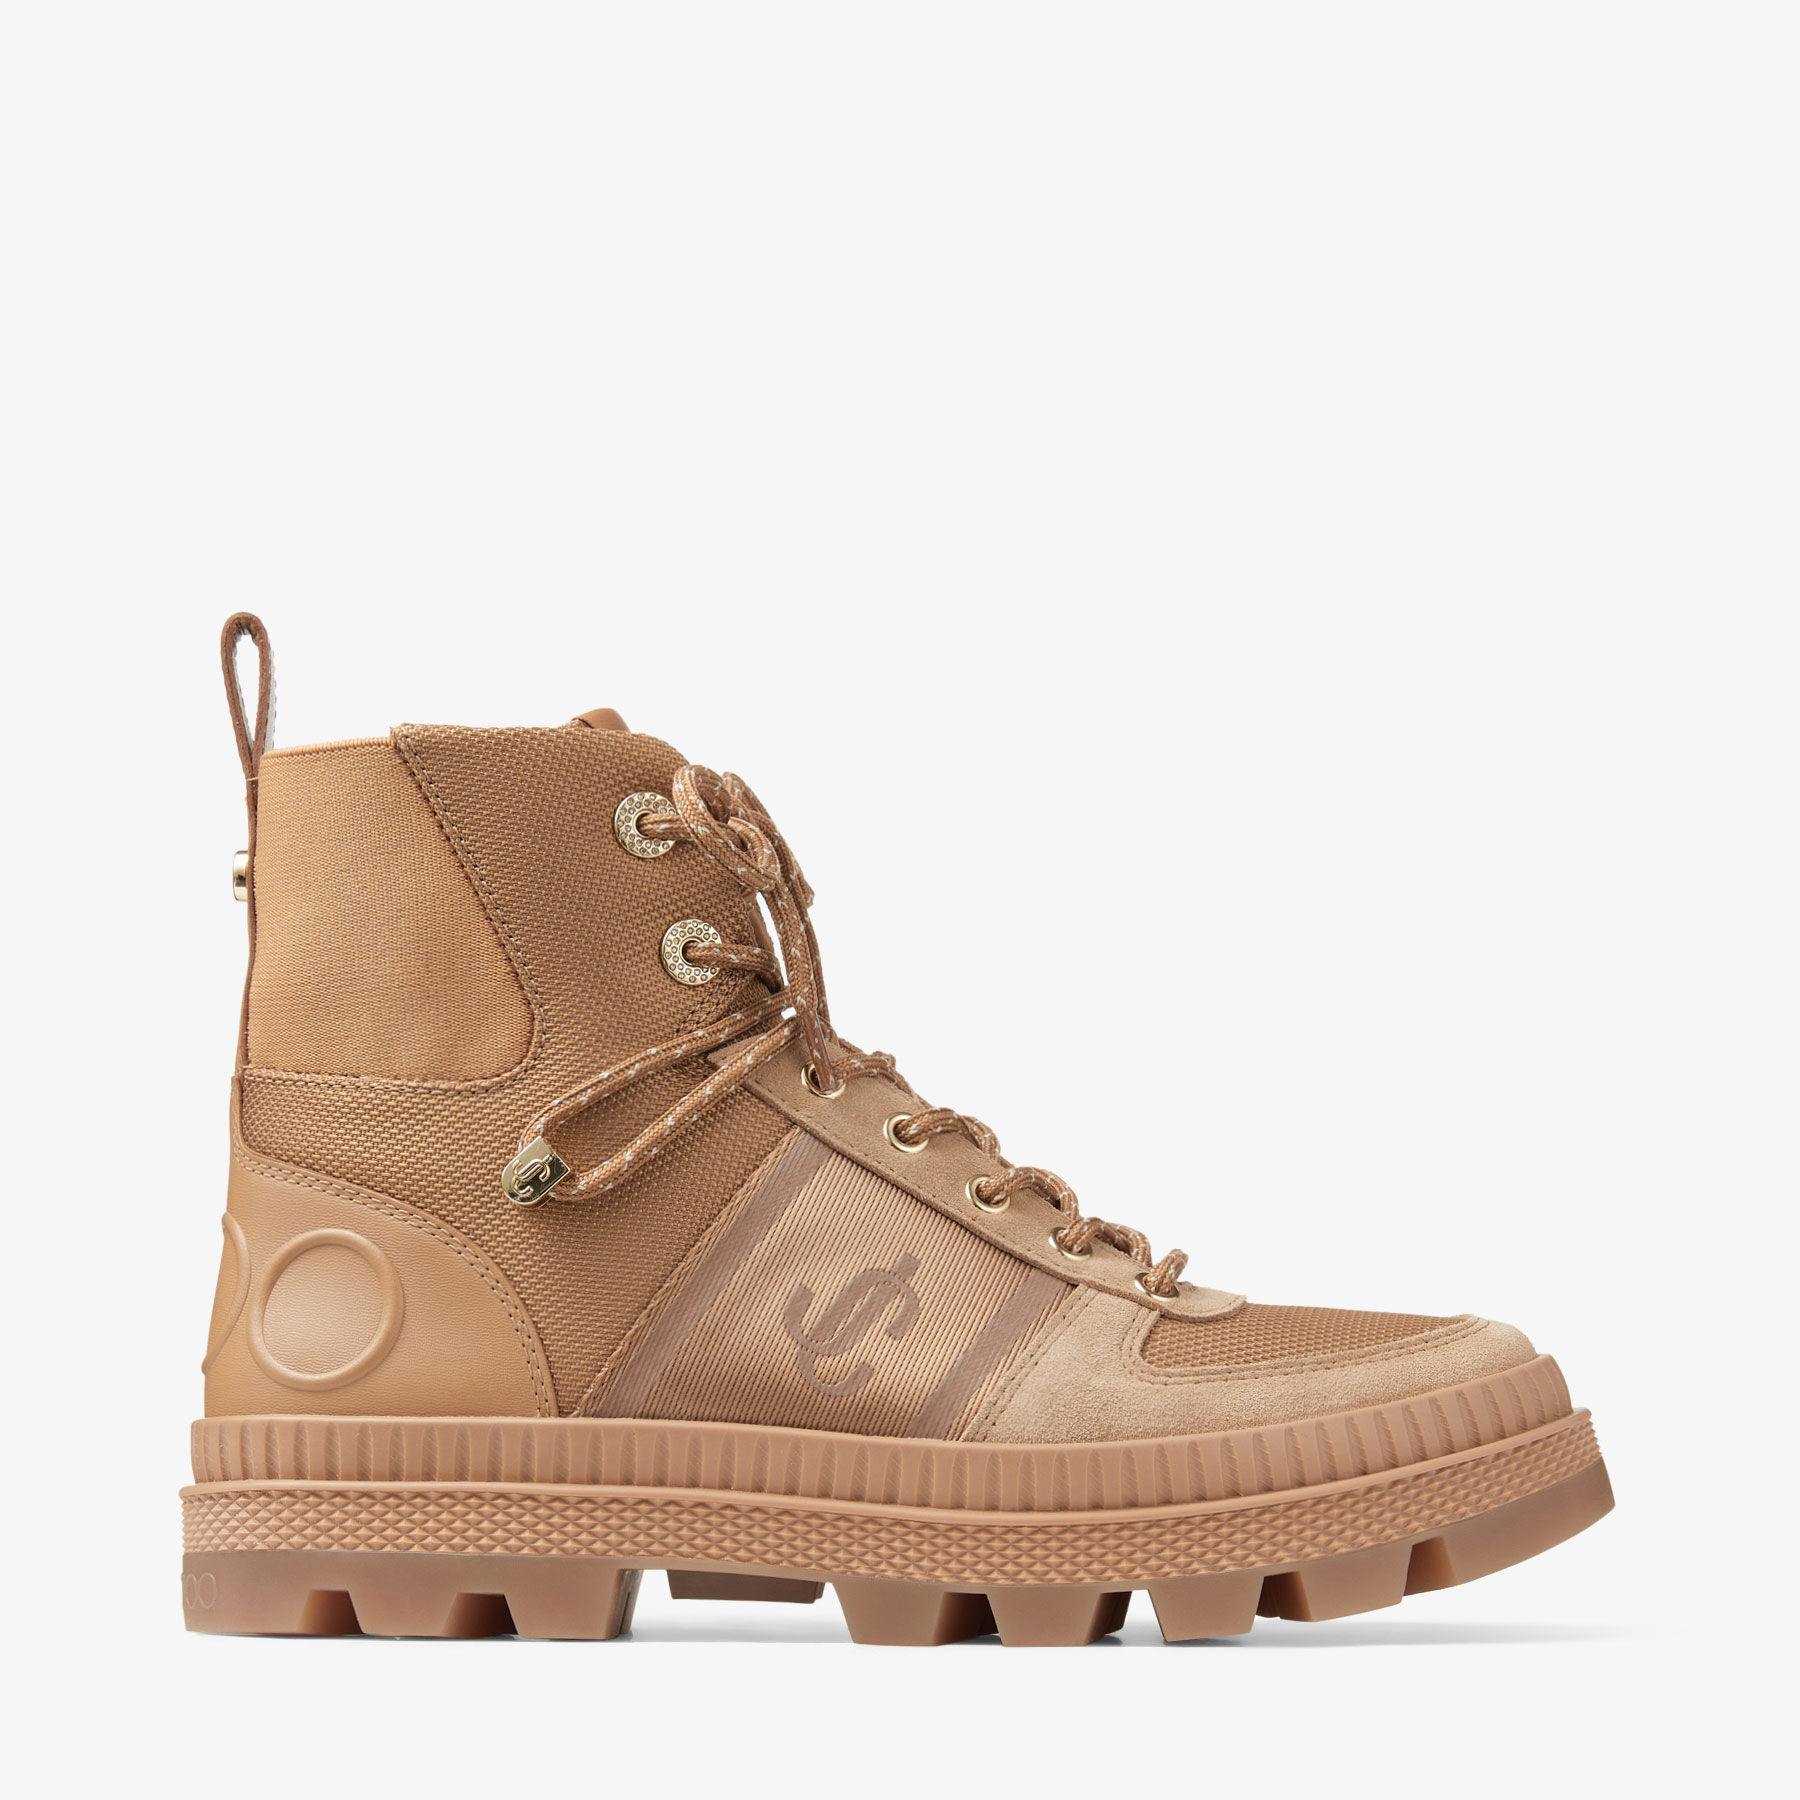 NORMANDY/F, Biscuit Nylon and Leather Boots